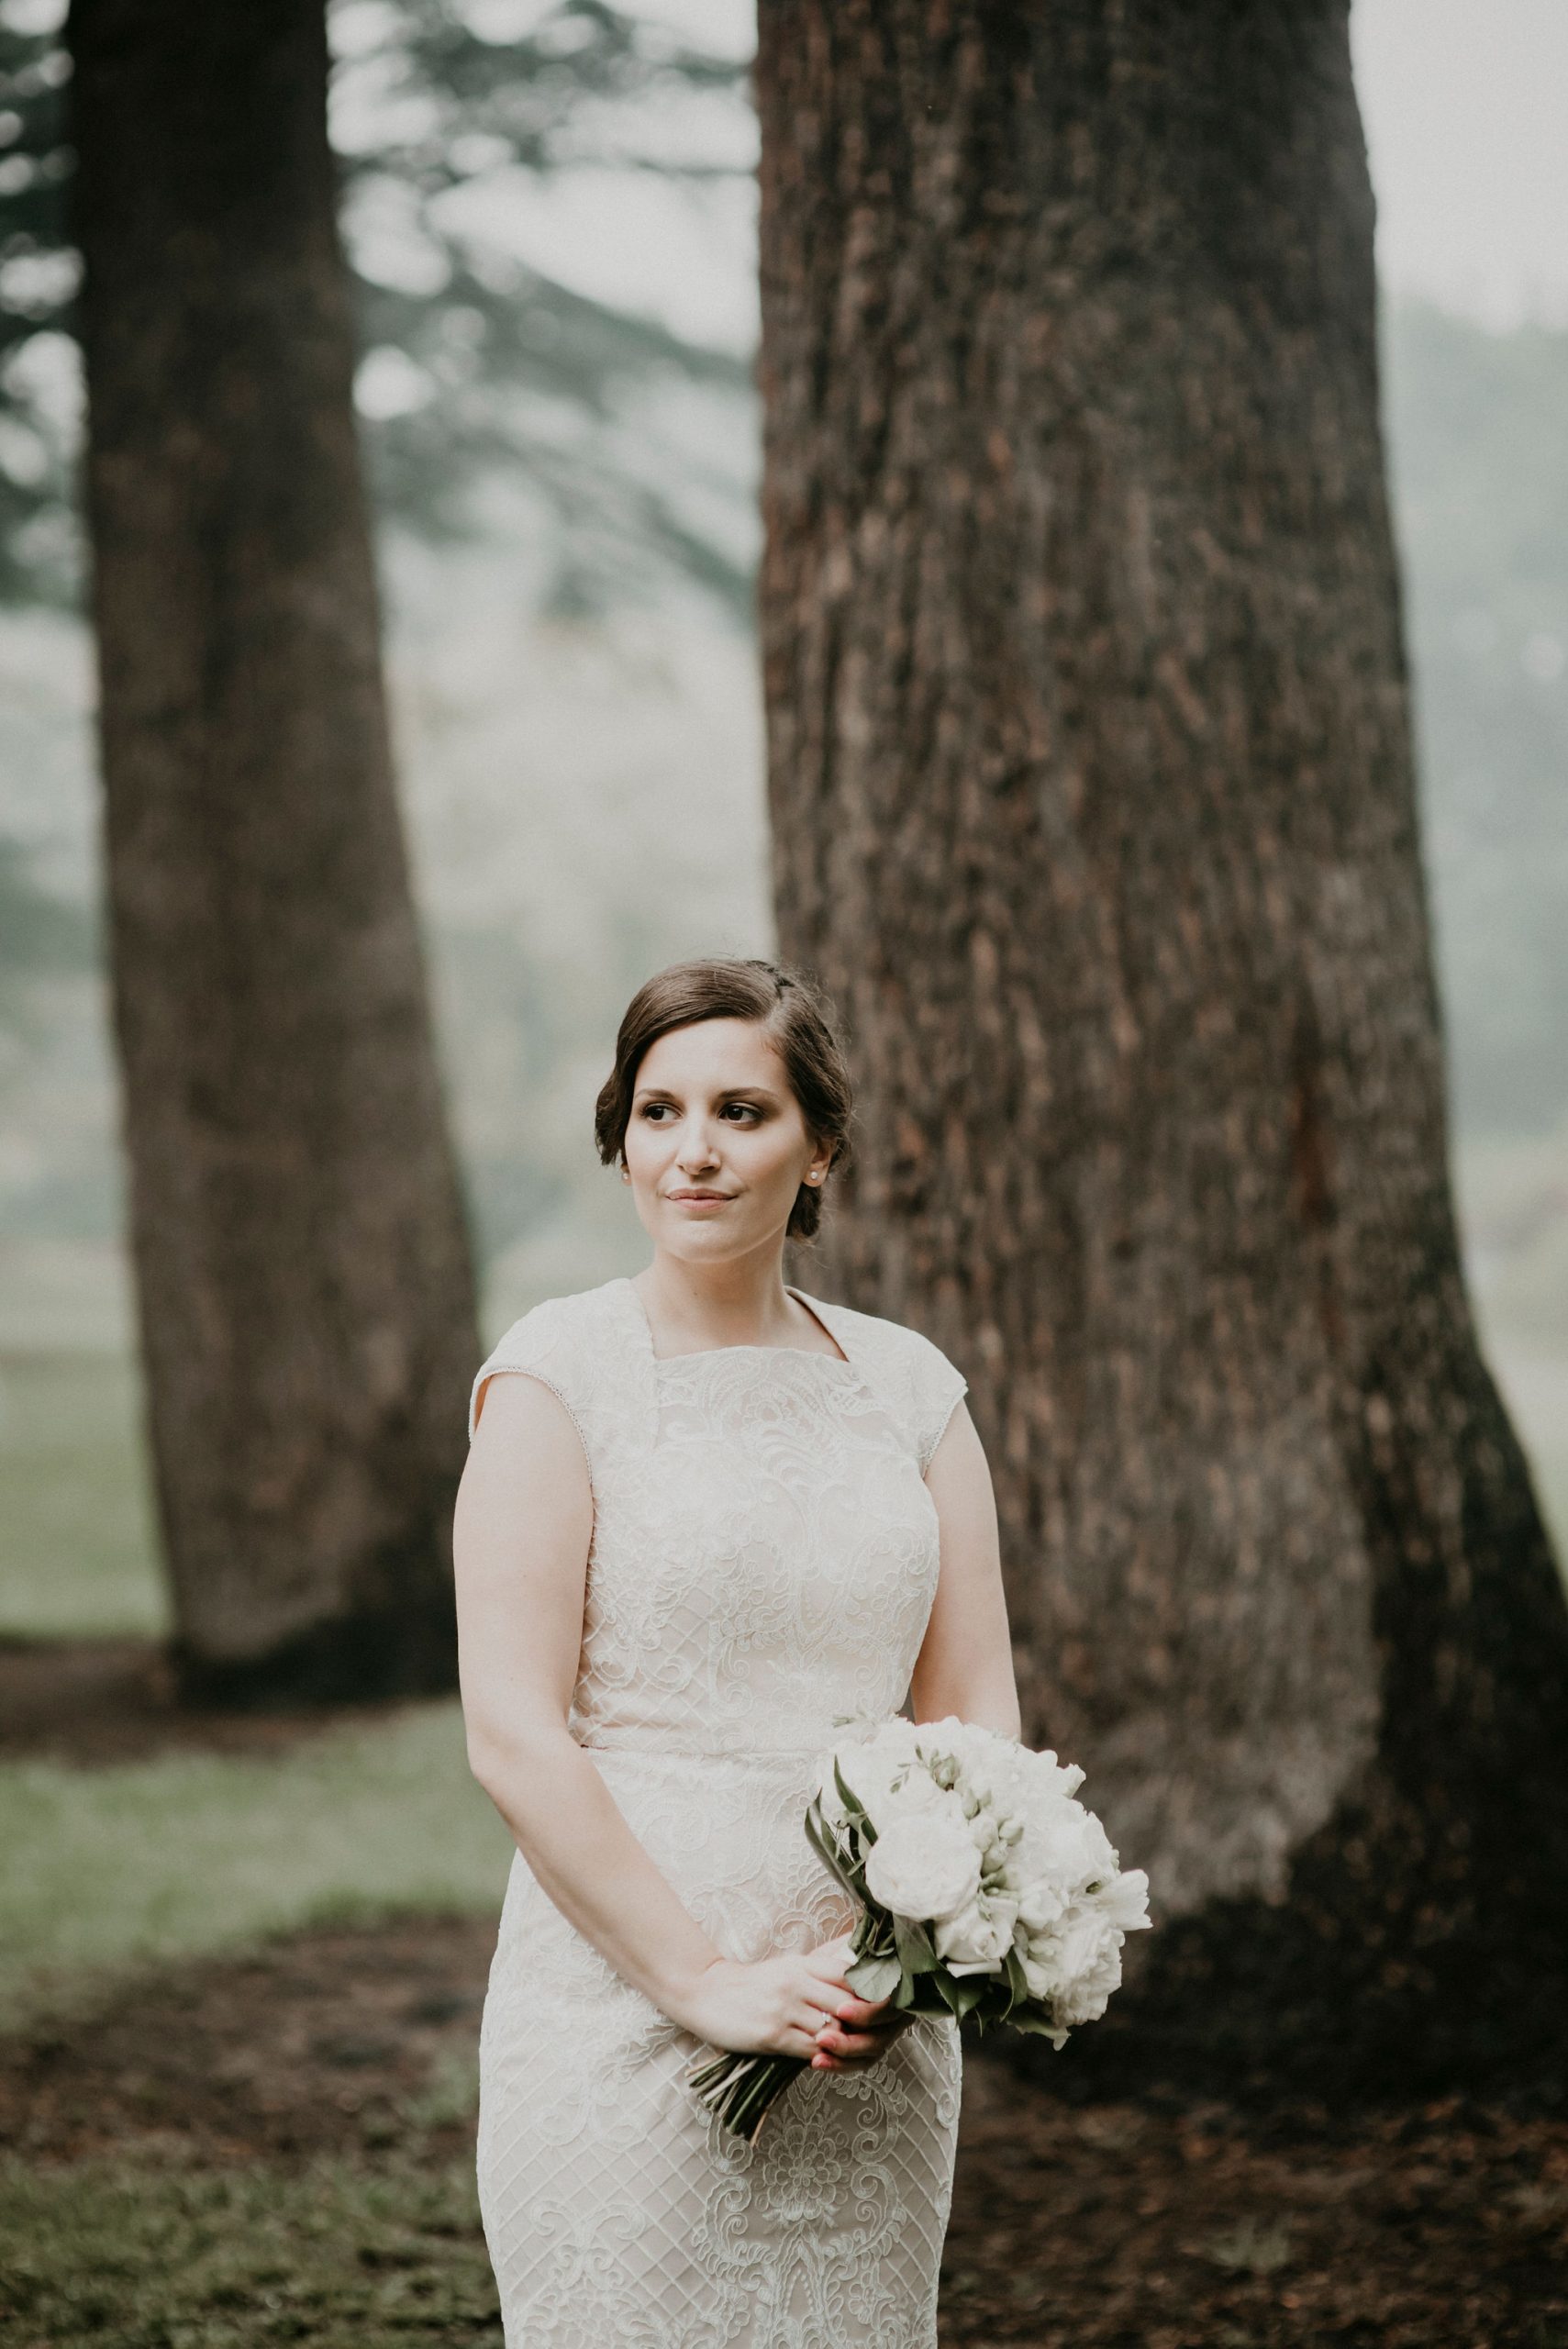 Bride stands in front of tree line in the rain and fog Let's Elope Melbourne Portfolio Celebrant Photographer Elopement Package Victoria Sarah Matler Photography intimate wedding Fitzroy Gardens Foggy Moody East Melbourne